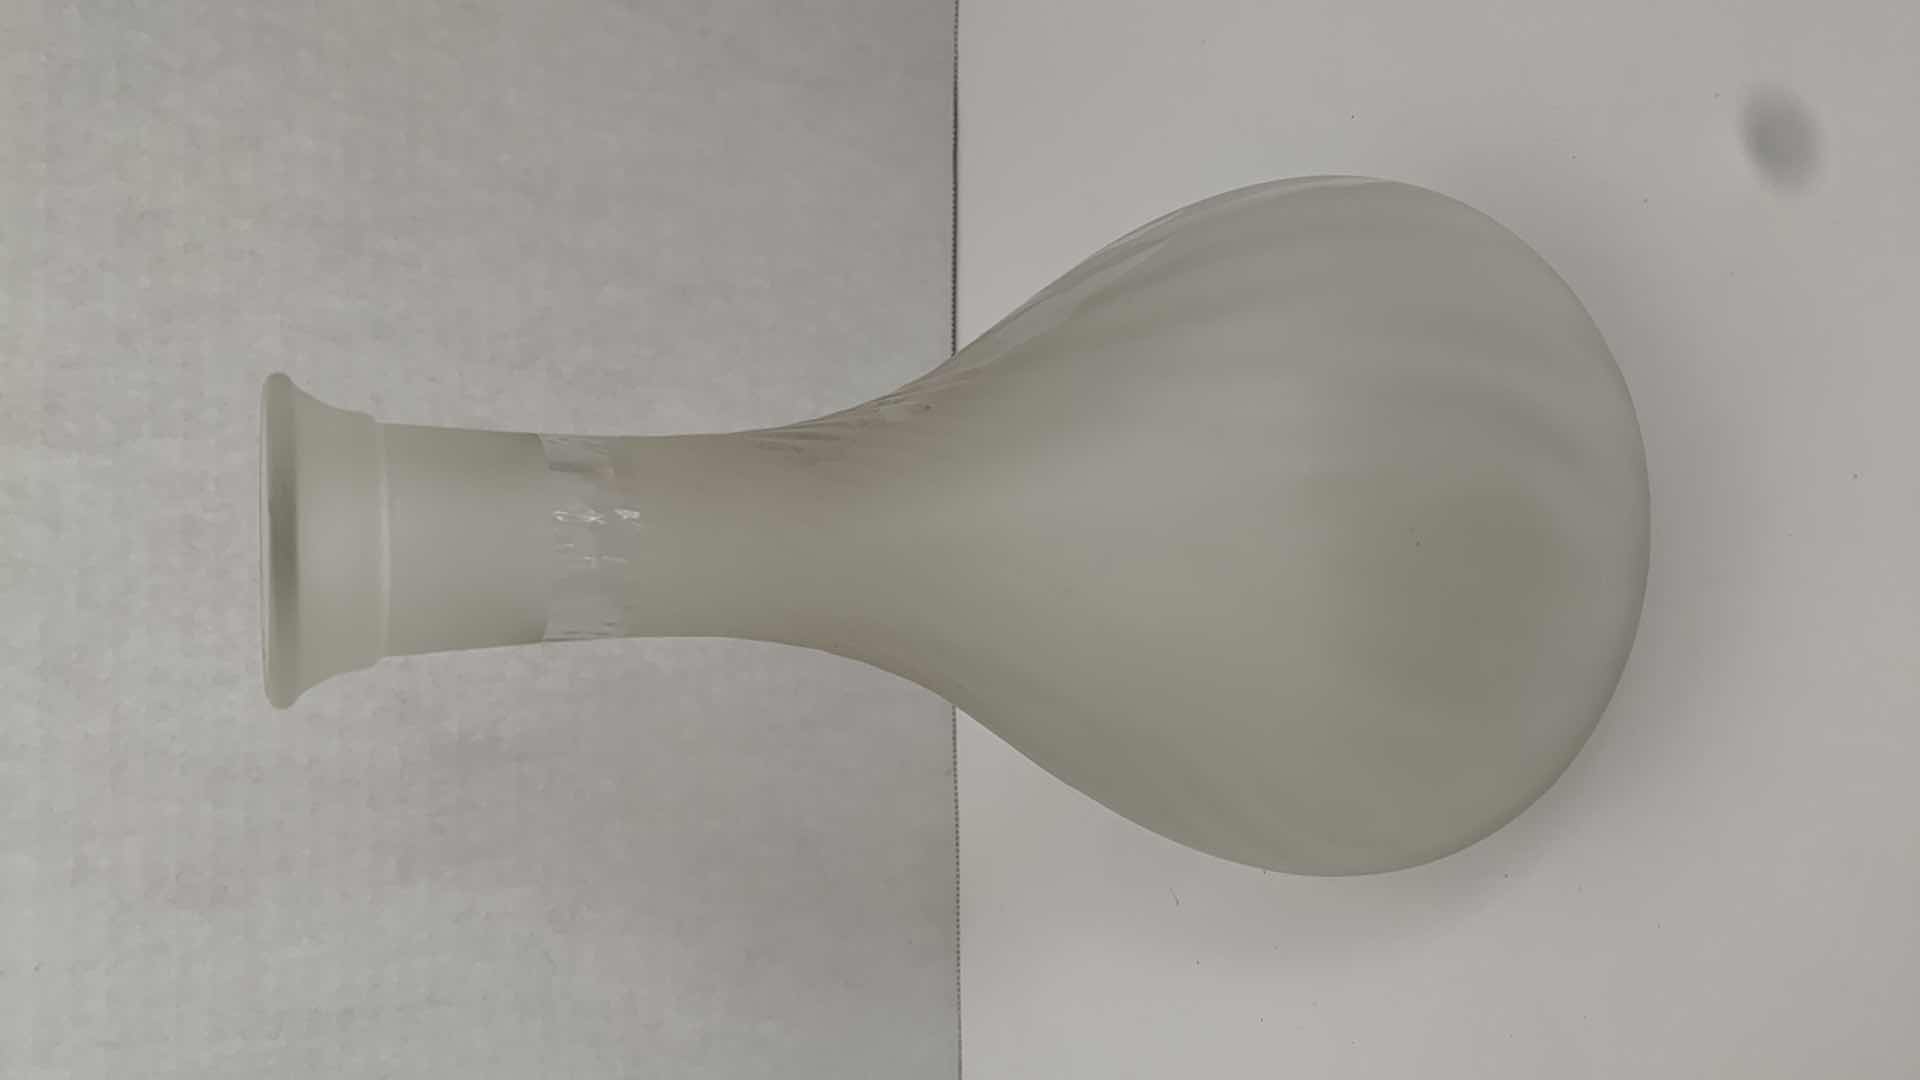 Photo 2 of FROSTED GLASS VASE WITH WOMAN FIGURE 6” X 6” H 9”